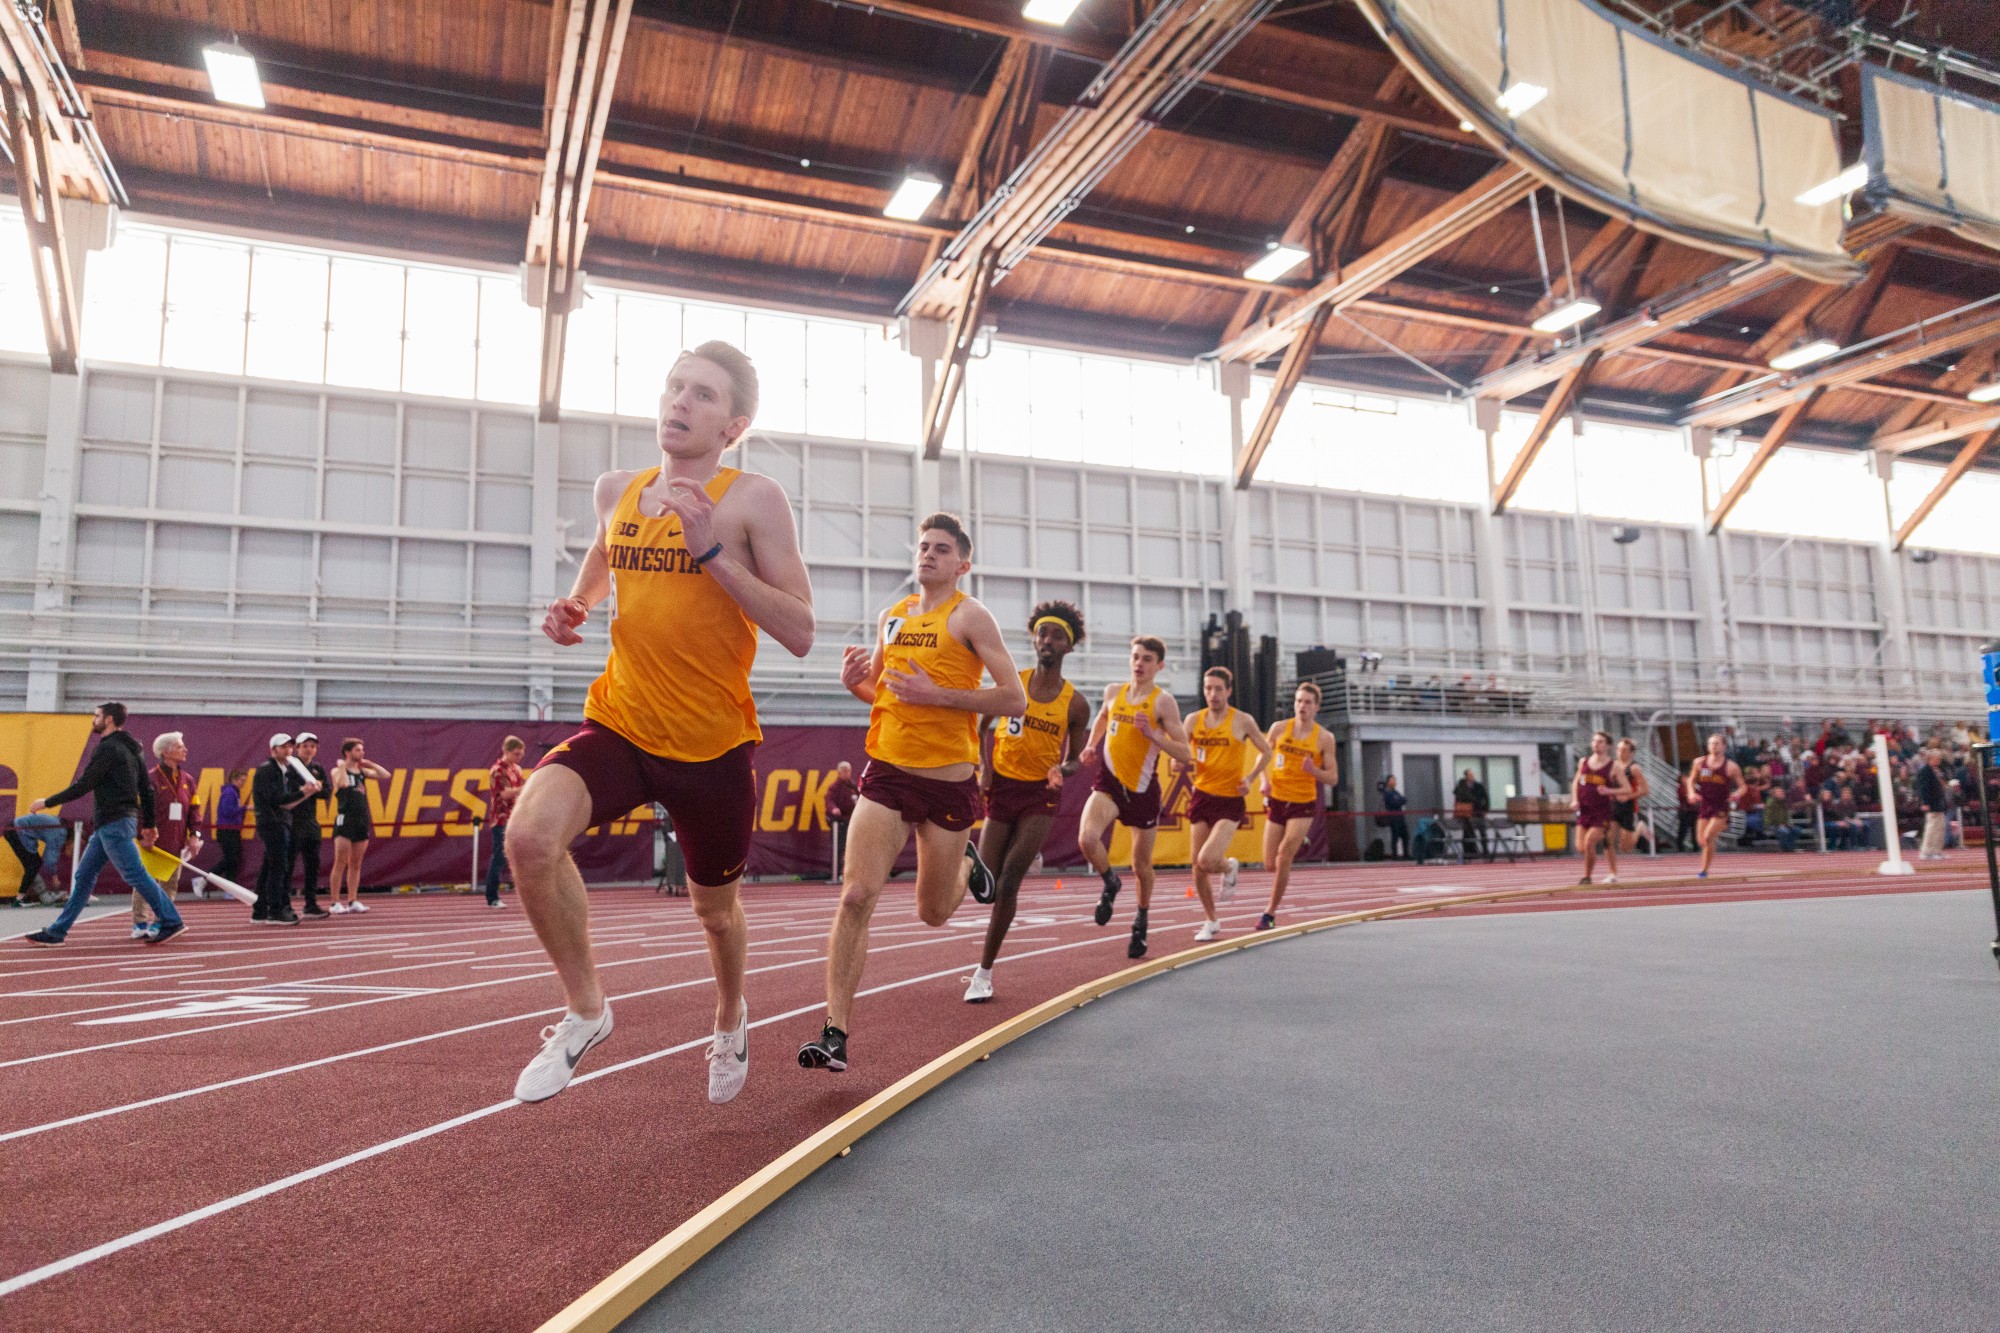 Gophers men lead the field in the mile run at the Minnesota Cold Classic at the University of Minnesota Fieldhouse on Friday, Feb. 21.